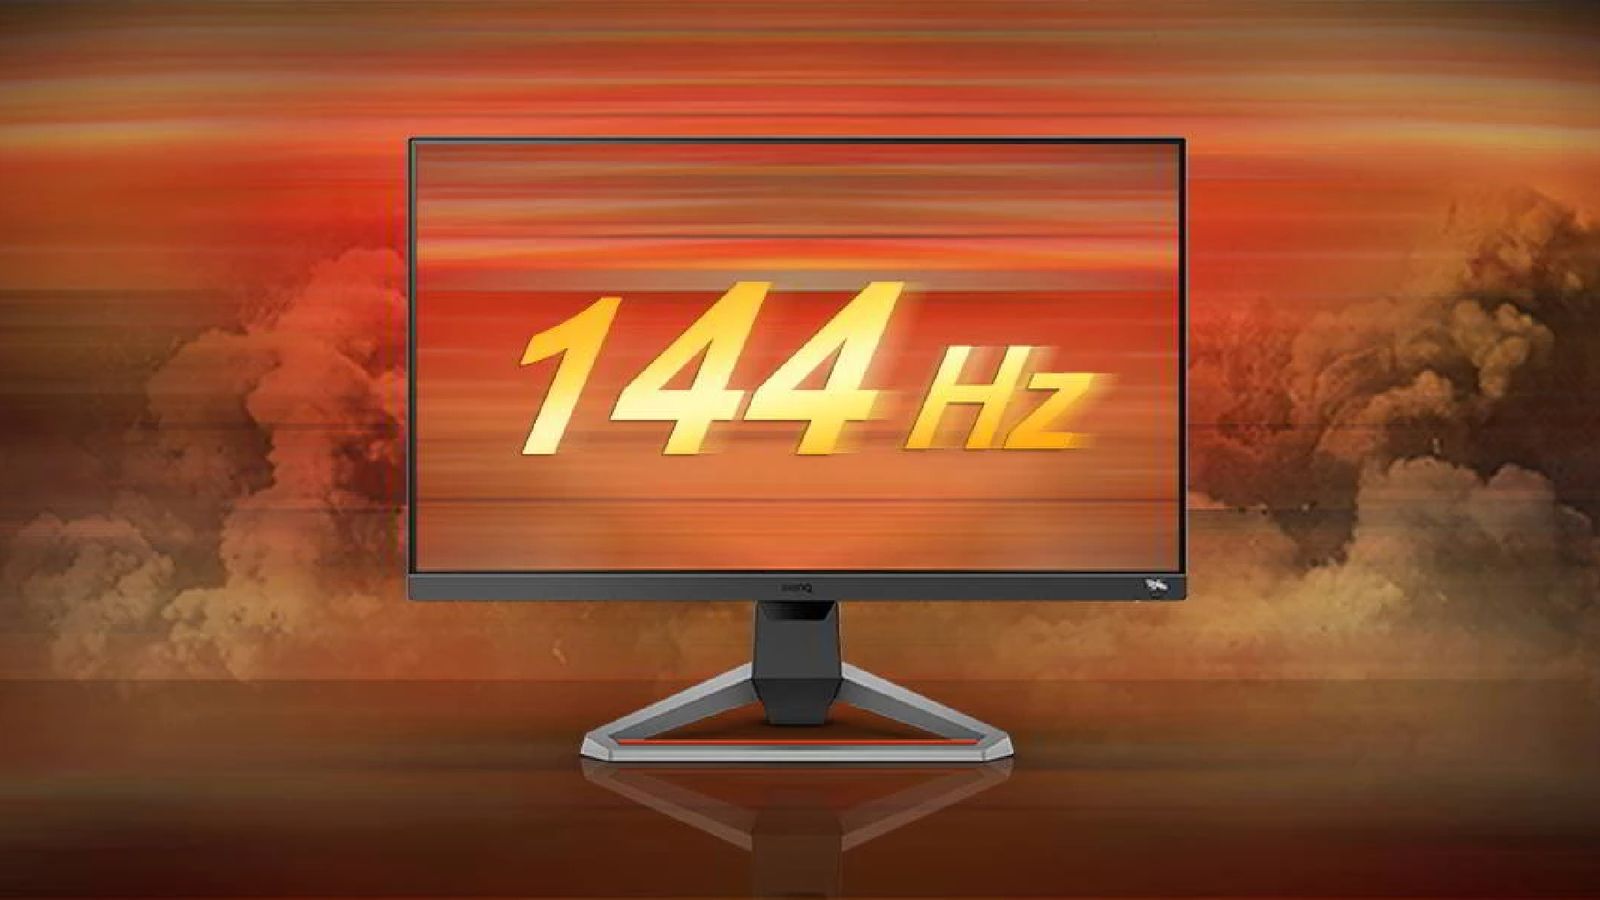 A dark grey and light grey monitor in front of a smokey orange background featuring 144Hz on the display.